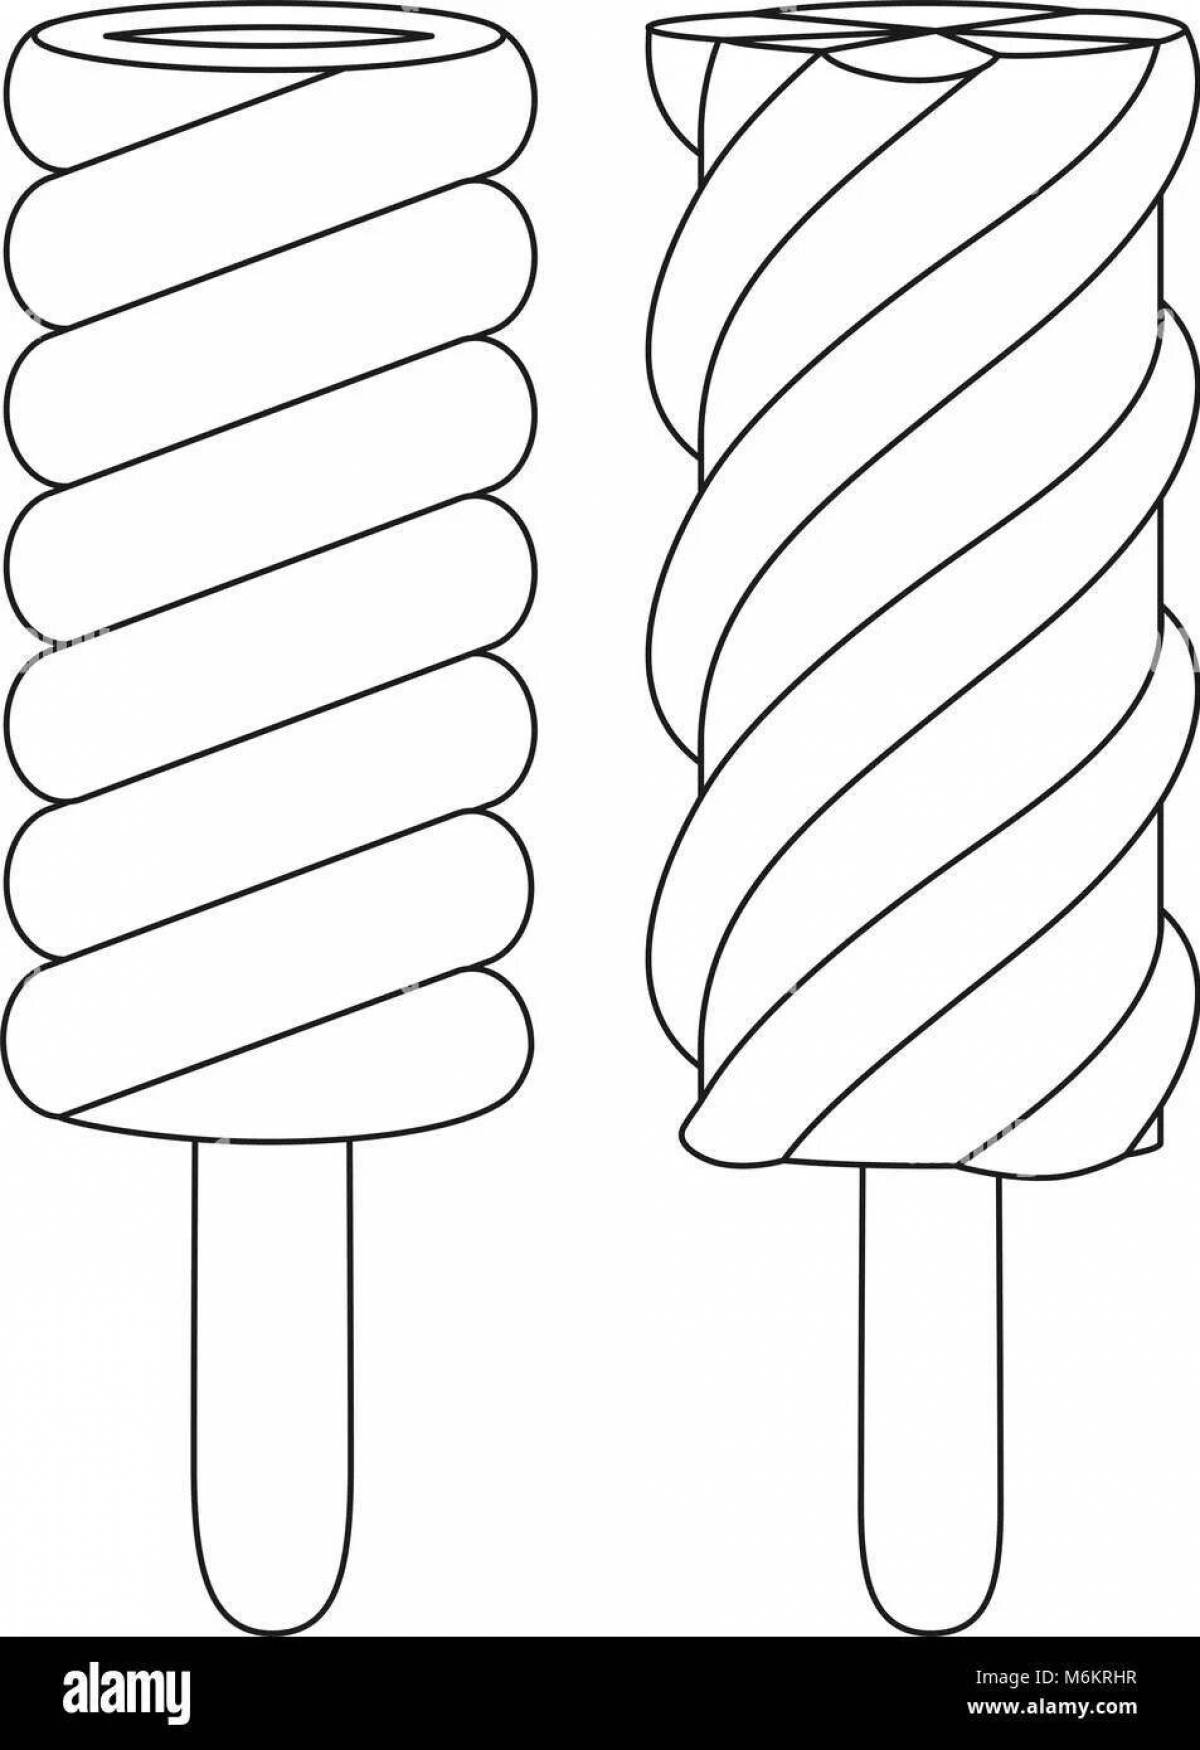 Cute popsicle ice cream coloring page